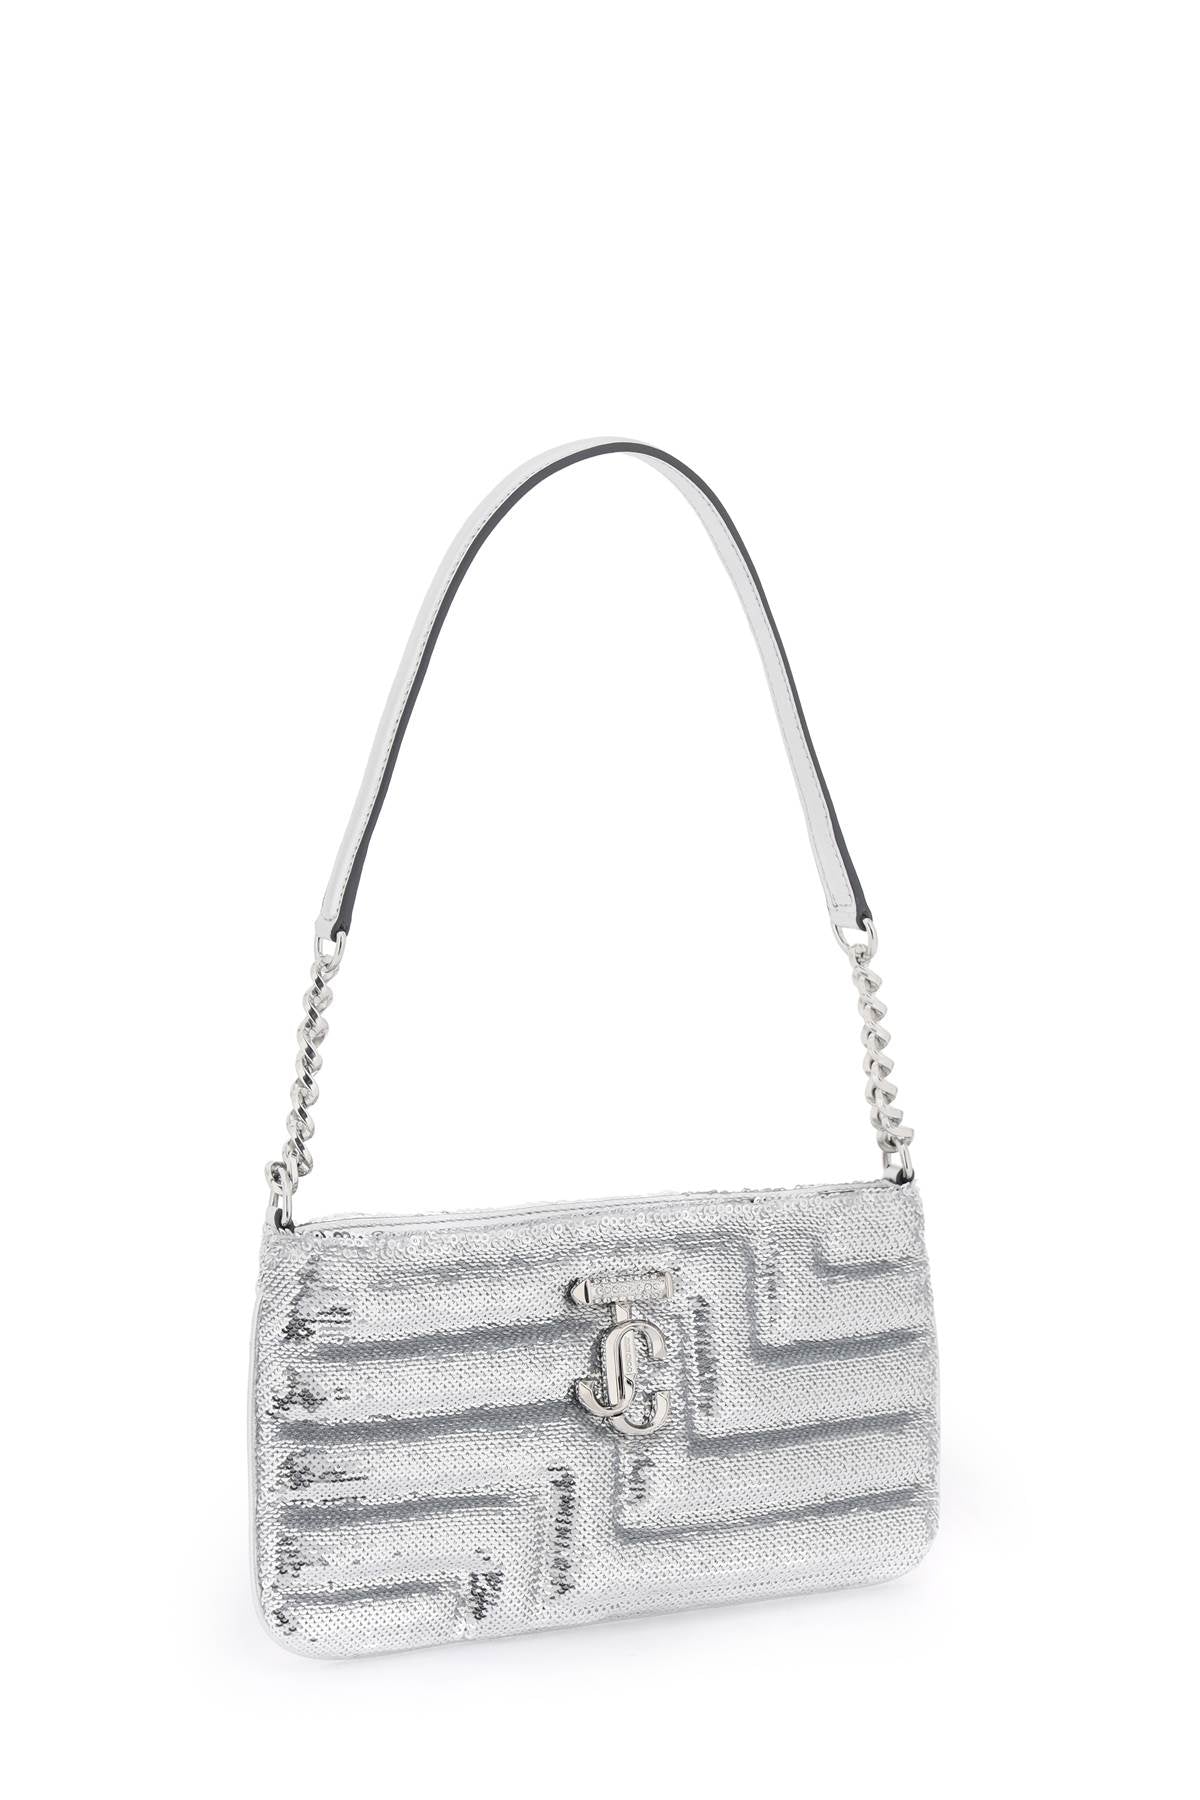 Glittering Silver Shoulder Bag for Women with All-Over Sequins and Monogram Detail